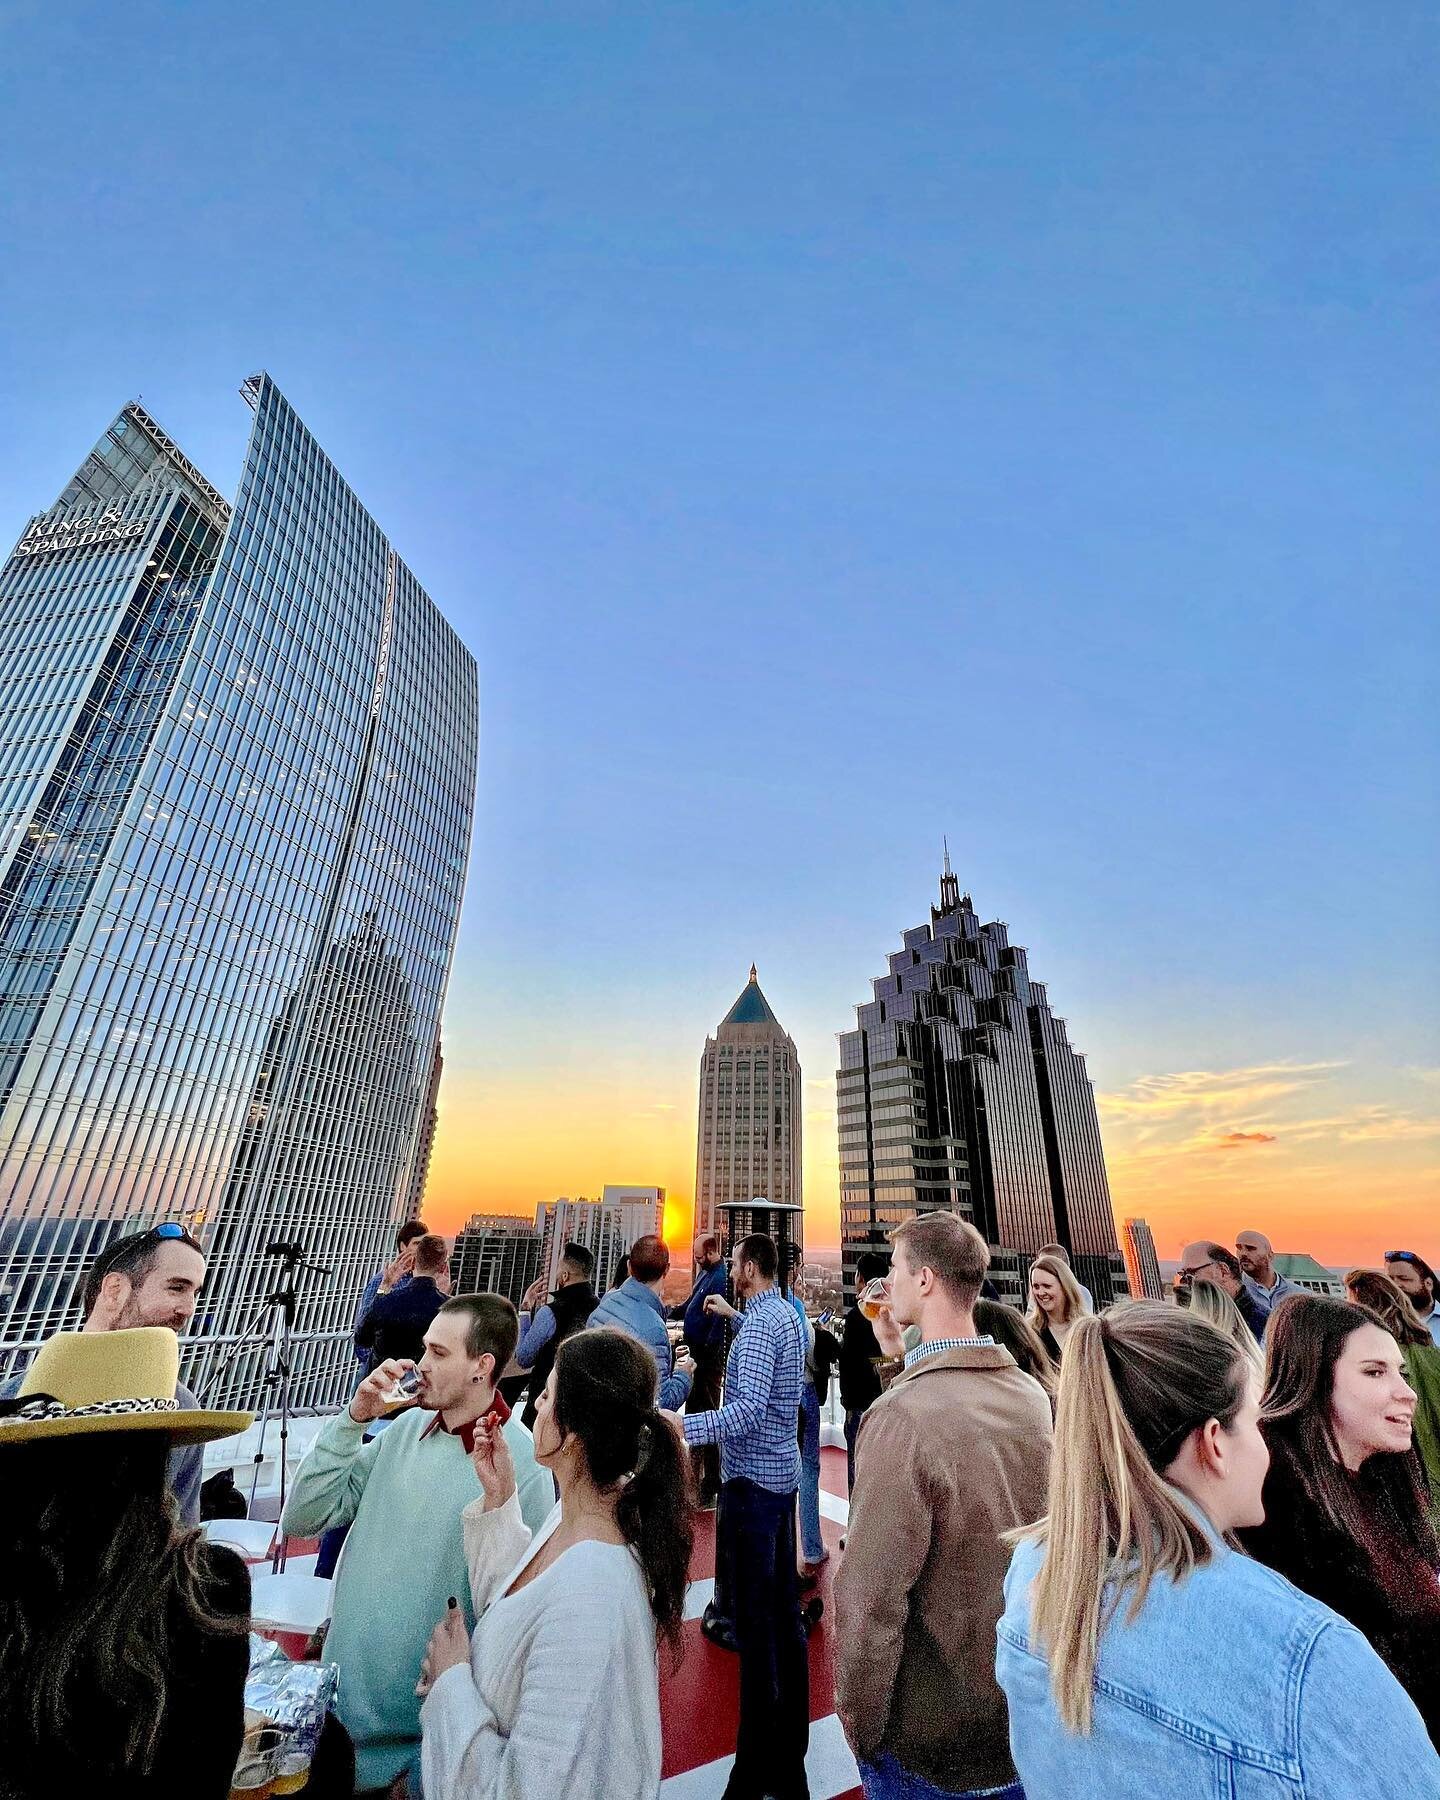 Fun times at Brews in the Sky on the Colony Square helipad this past Thursday. Great vibes, perfect sunset&hellip; what a fun event 💫
.
.
.
#atlanta  #discoveratl #midtownatl #colonysquare #brewsinthesky #piedmontpark #whyiloveatl  #earlyfall #midto